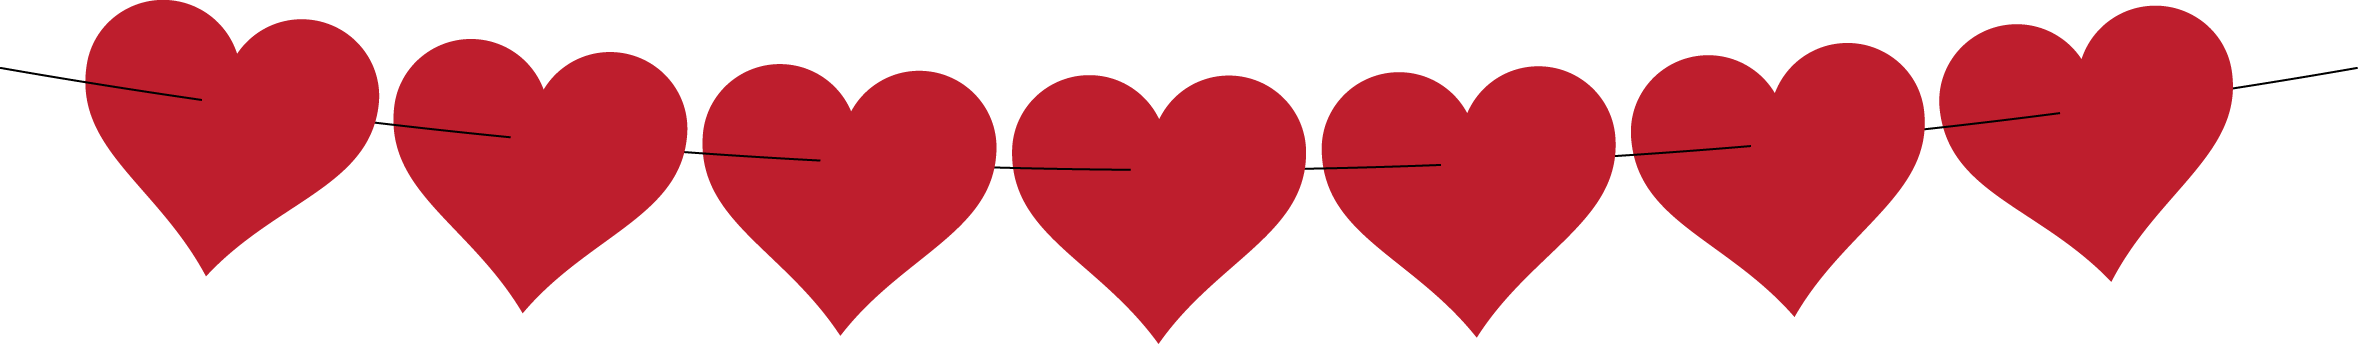 String of hearts clipart